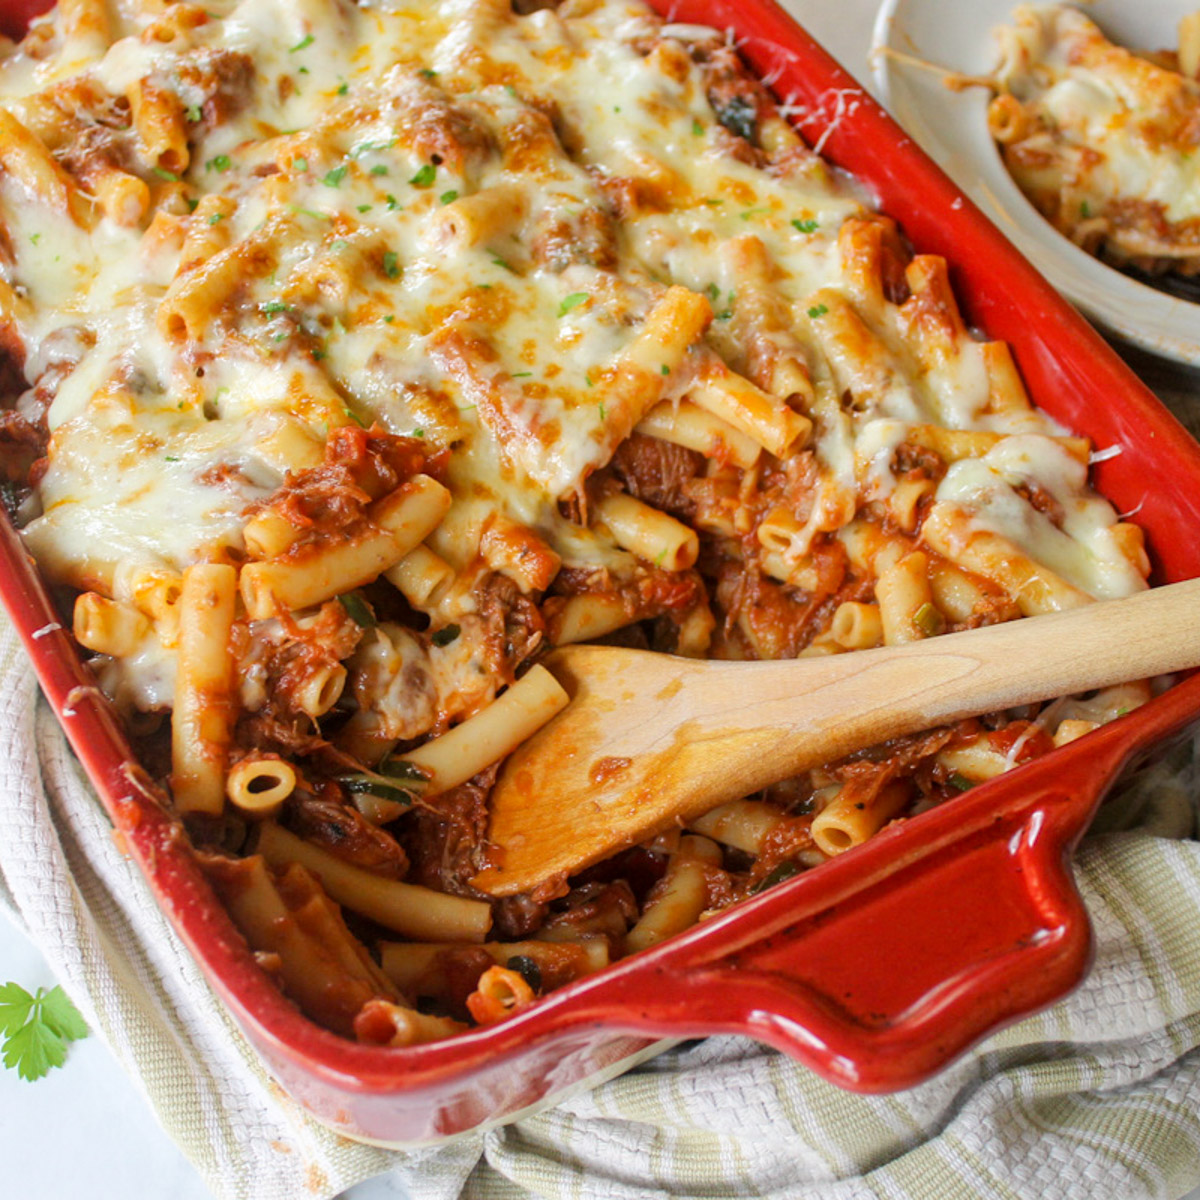 A wooden spoon serving ragu pasta bake with ziti noodles in a beef marinara sauce.